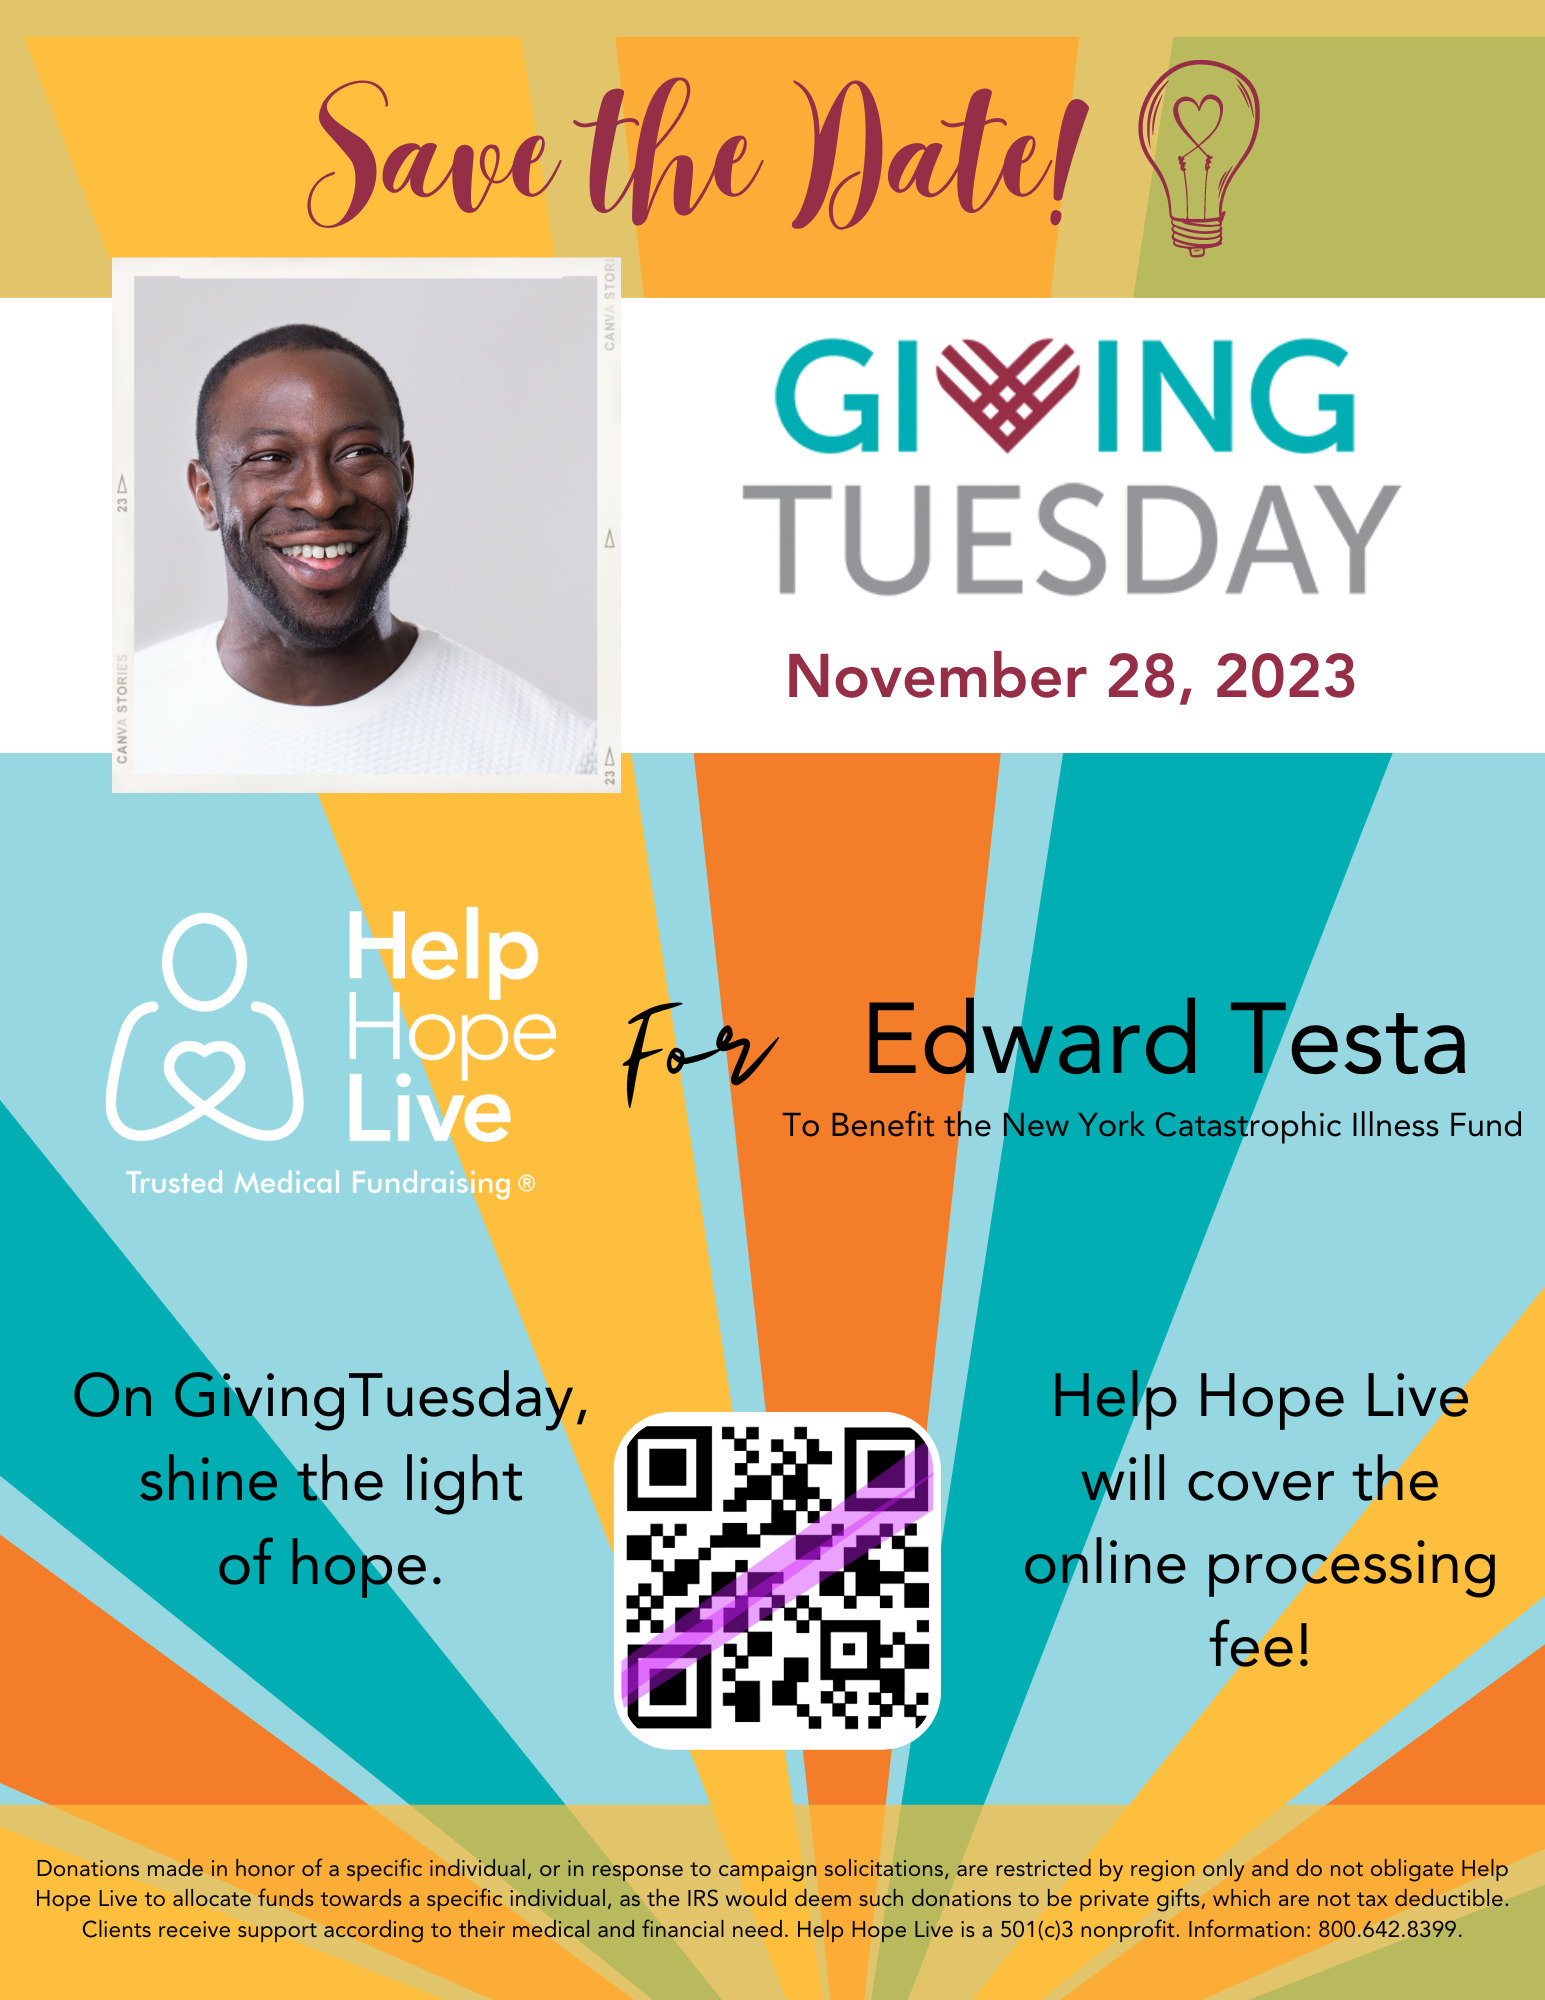 A GivingTuesday sample client flyer from Help Hope Live features a gold, light blue, teal, and orange sunburst design, the GivingTuesday logo, November 28 2023, and a sample client photo in a square frame. The flyer includes a QR code, the Help Hope Live logo, the client's name, a disclosure about donations processed through Help Hope Live, and the text 